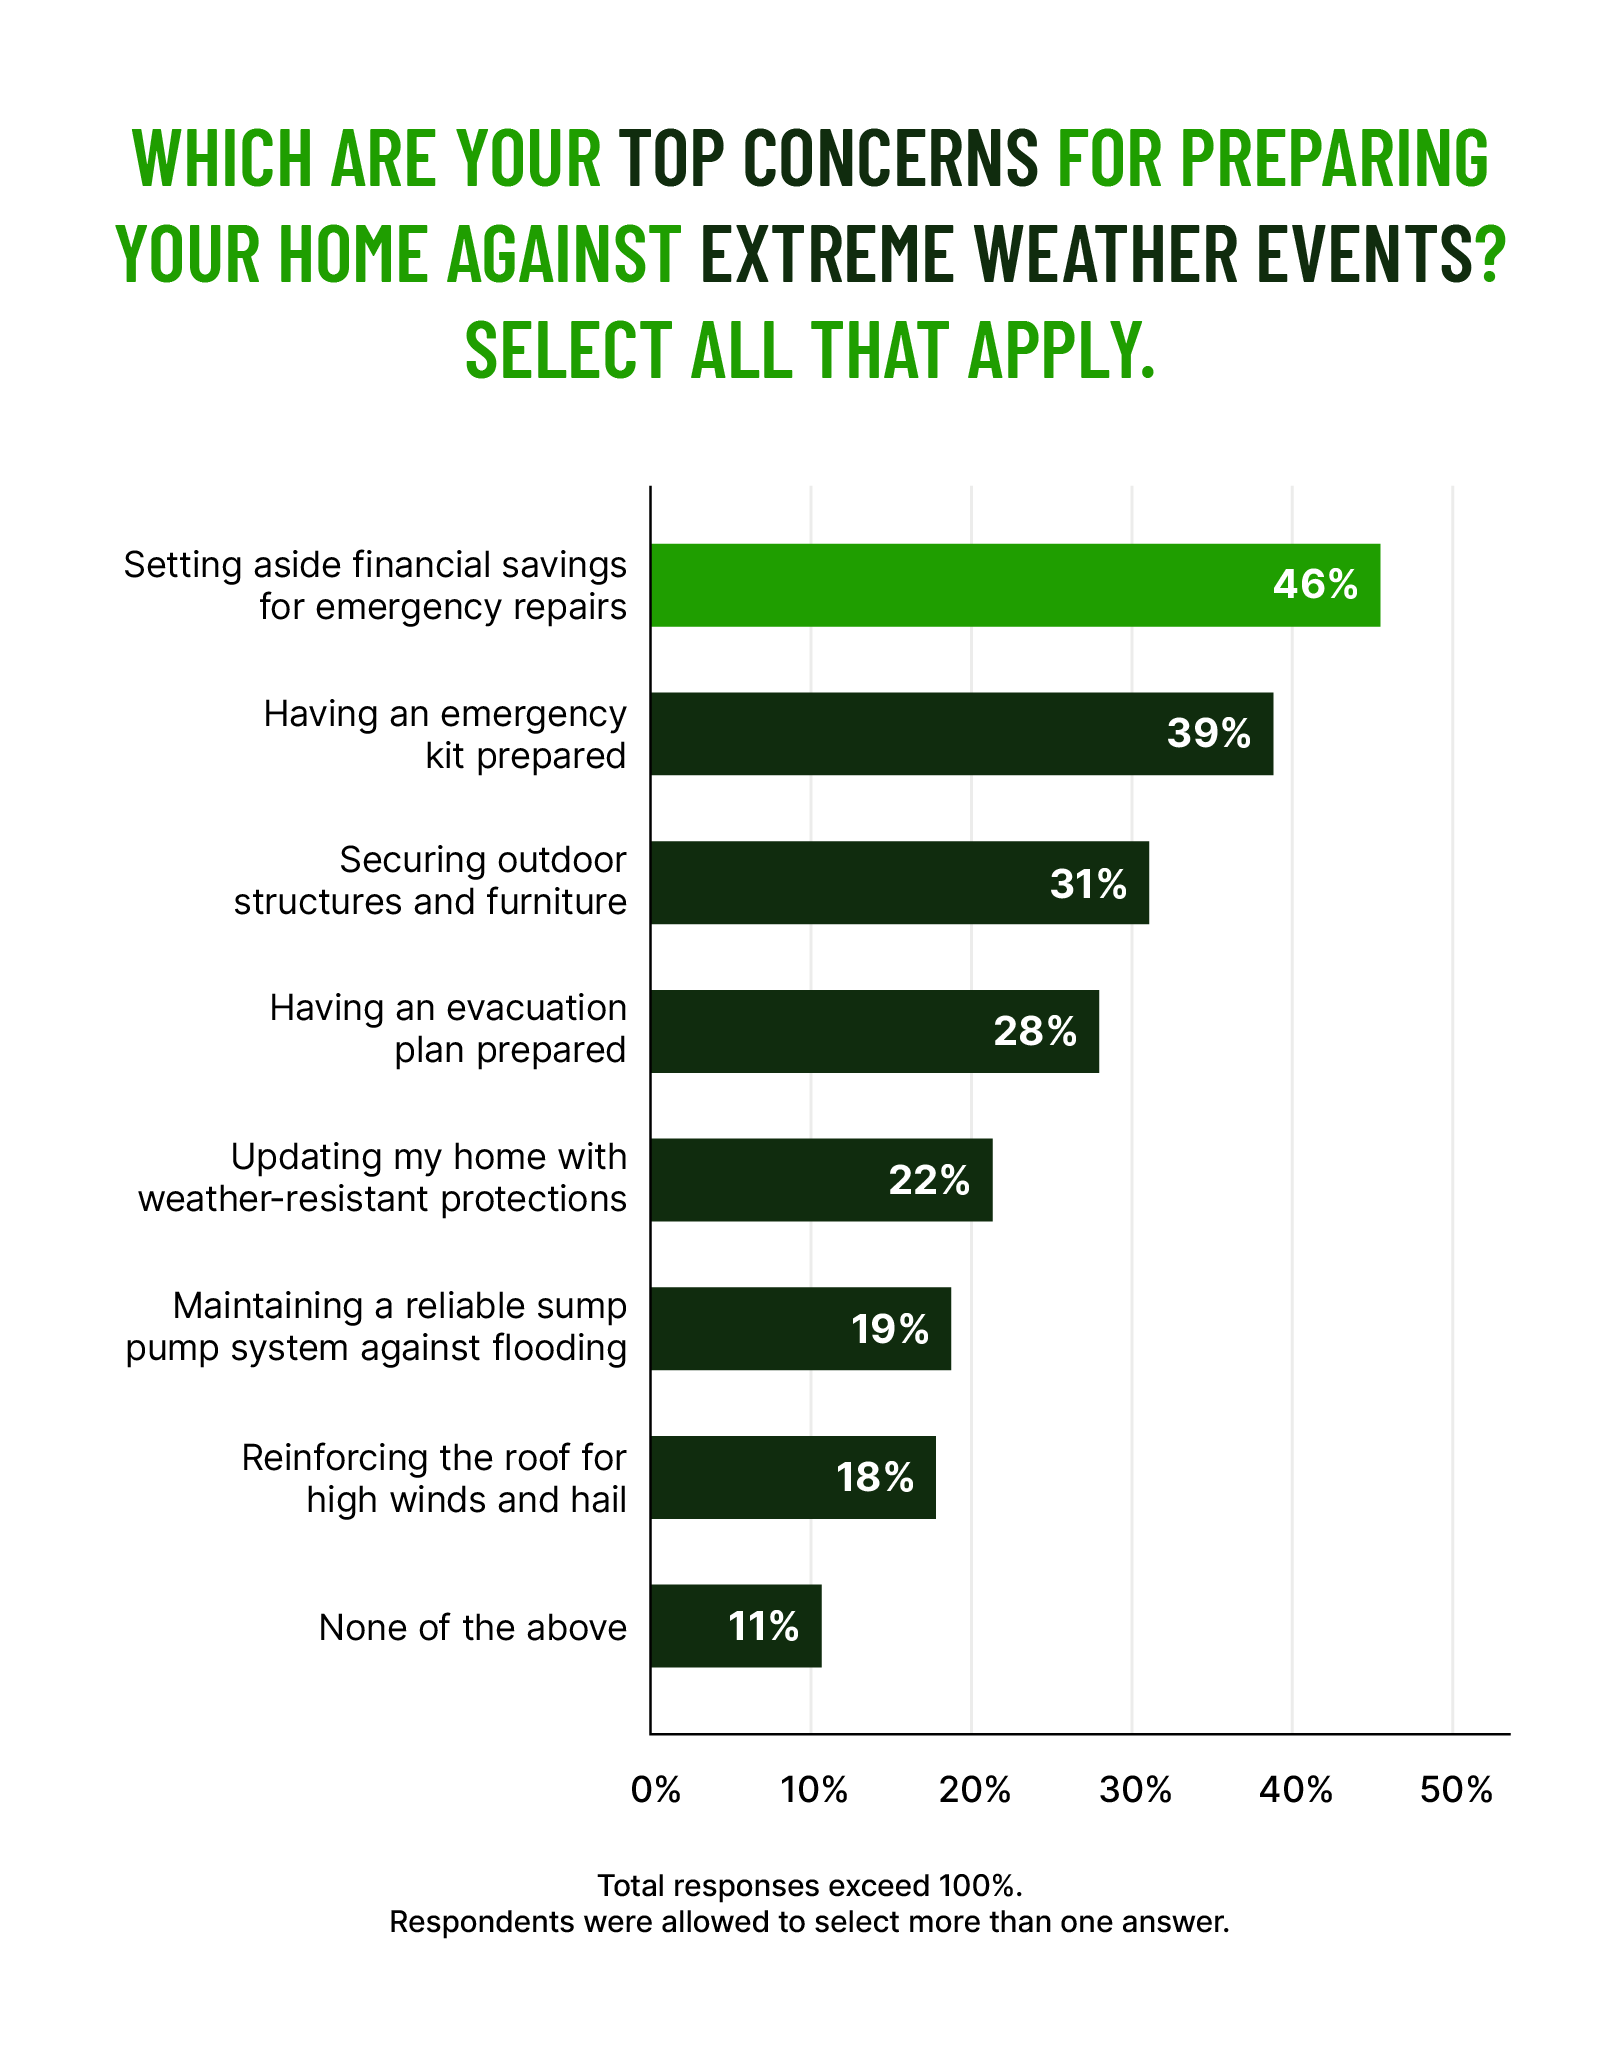 horizontal bar chart showing the top concerns that homeowners have for preparing their home against extreme weather events